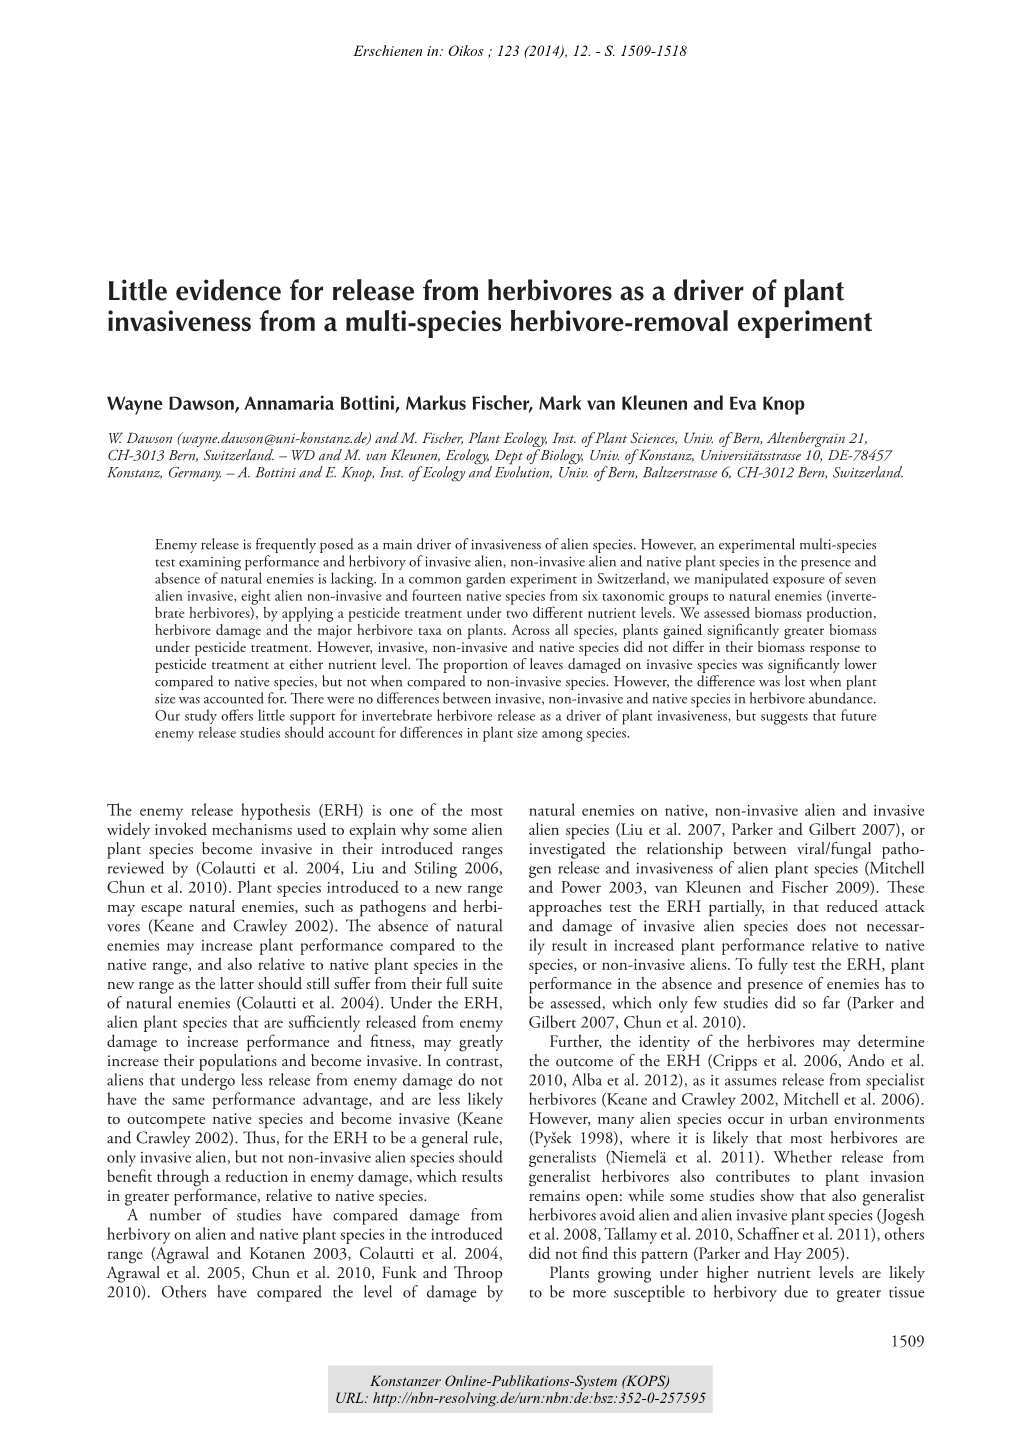 Little Evidence for Release from Herbivores As a Driver of Plant Invasiveness from a Multi-Species Herbivore-Removal Experiment